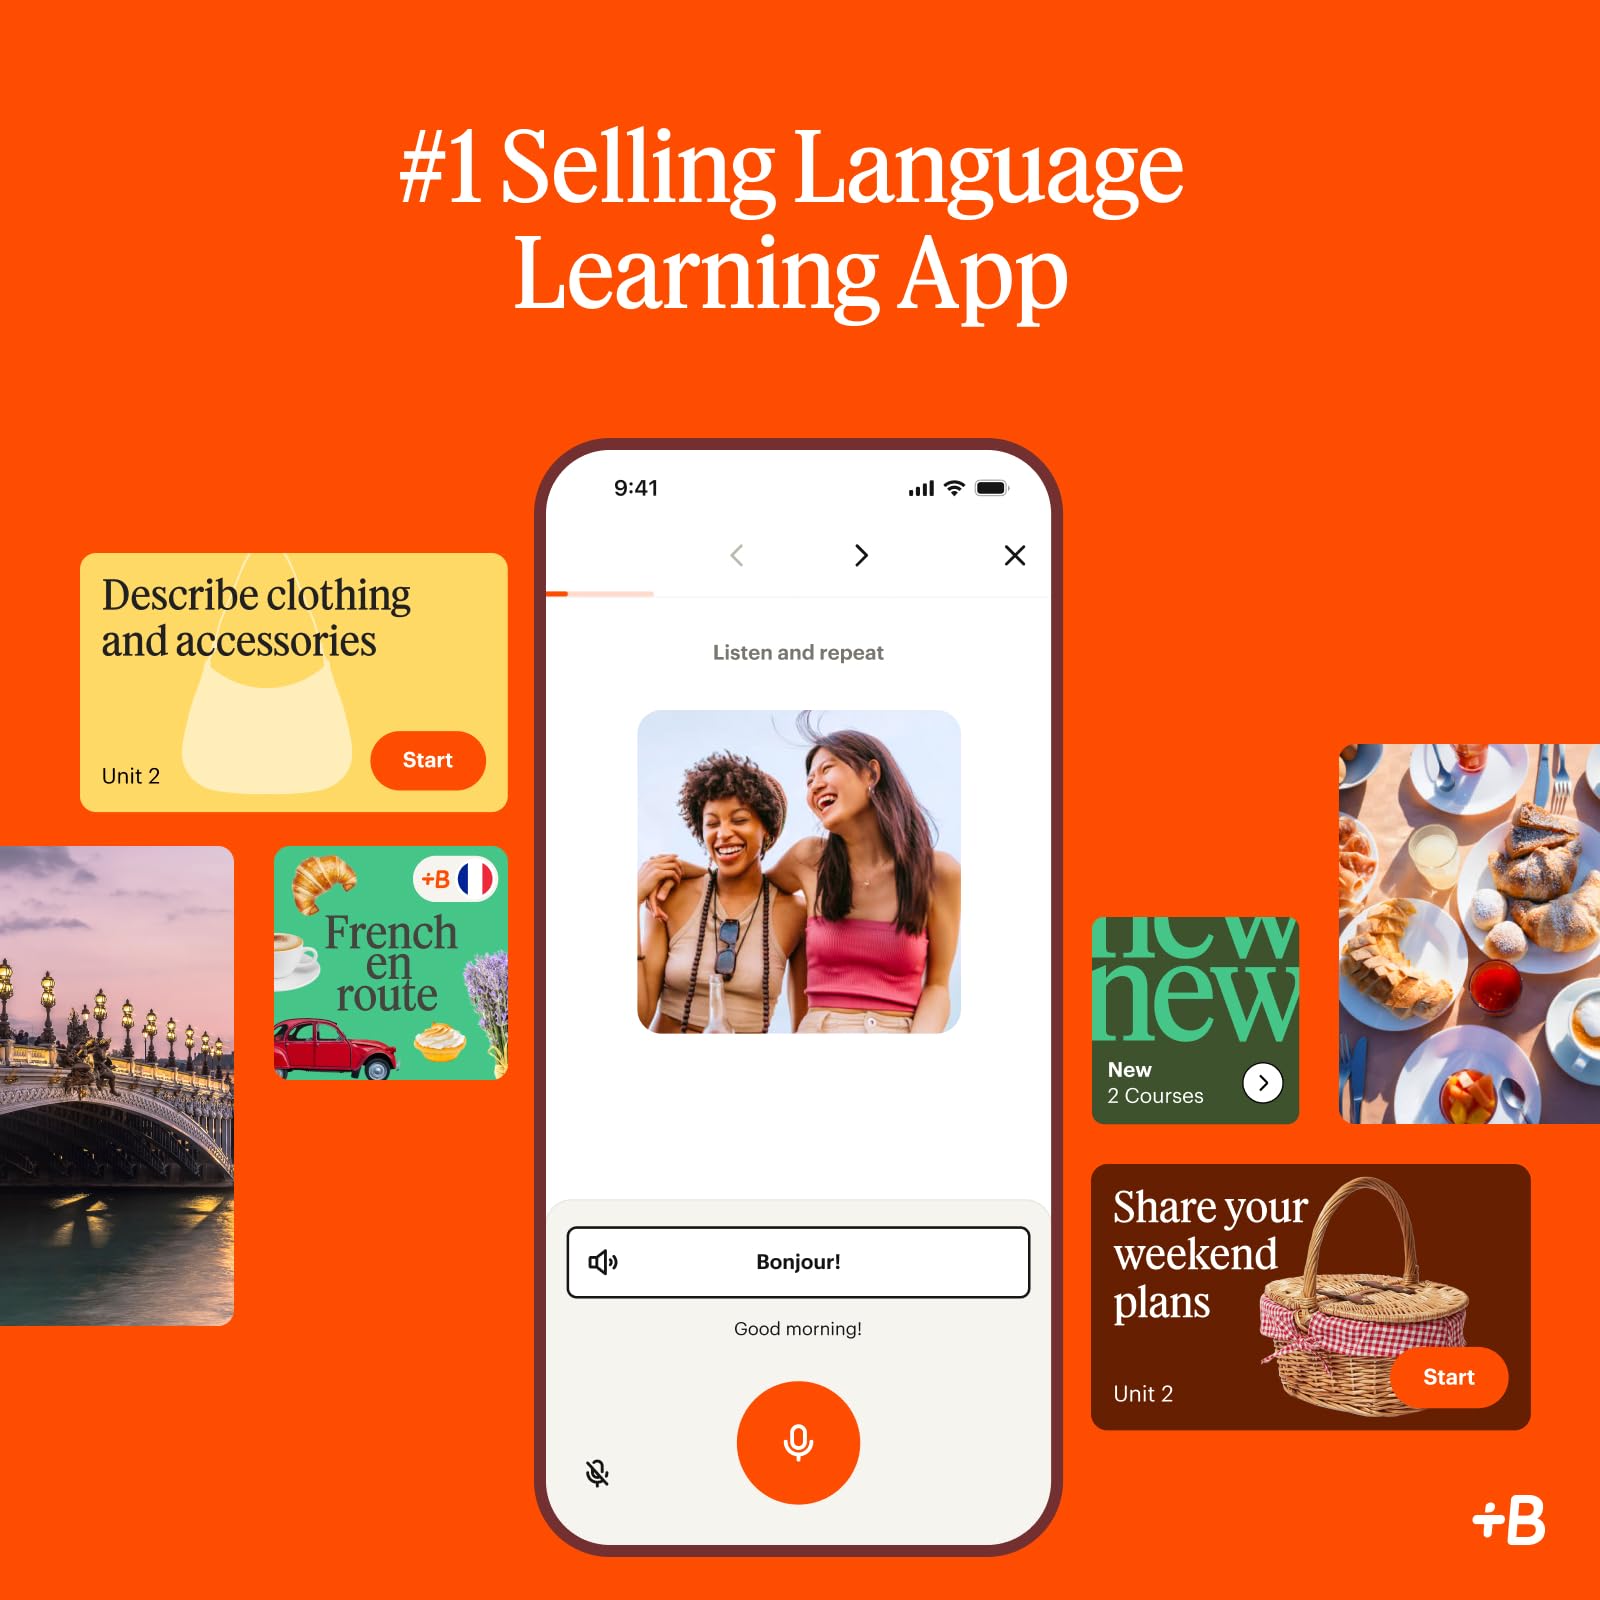 Babbel Language Learning Software - Learn to Speak Spanish, French, English, & More - All 14 Languages Included, Audio Lessons - Compatible with iOS, Android, Mac & PC (3 Month Subscription)